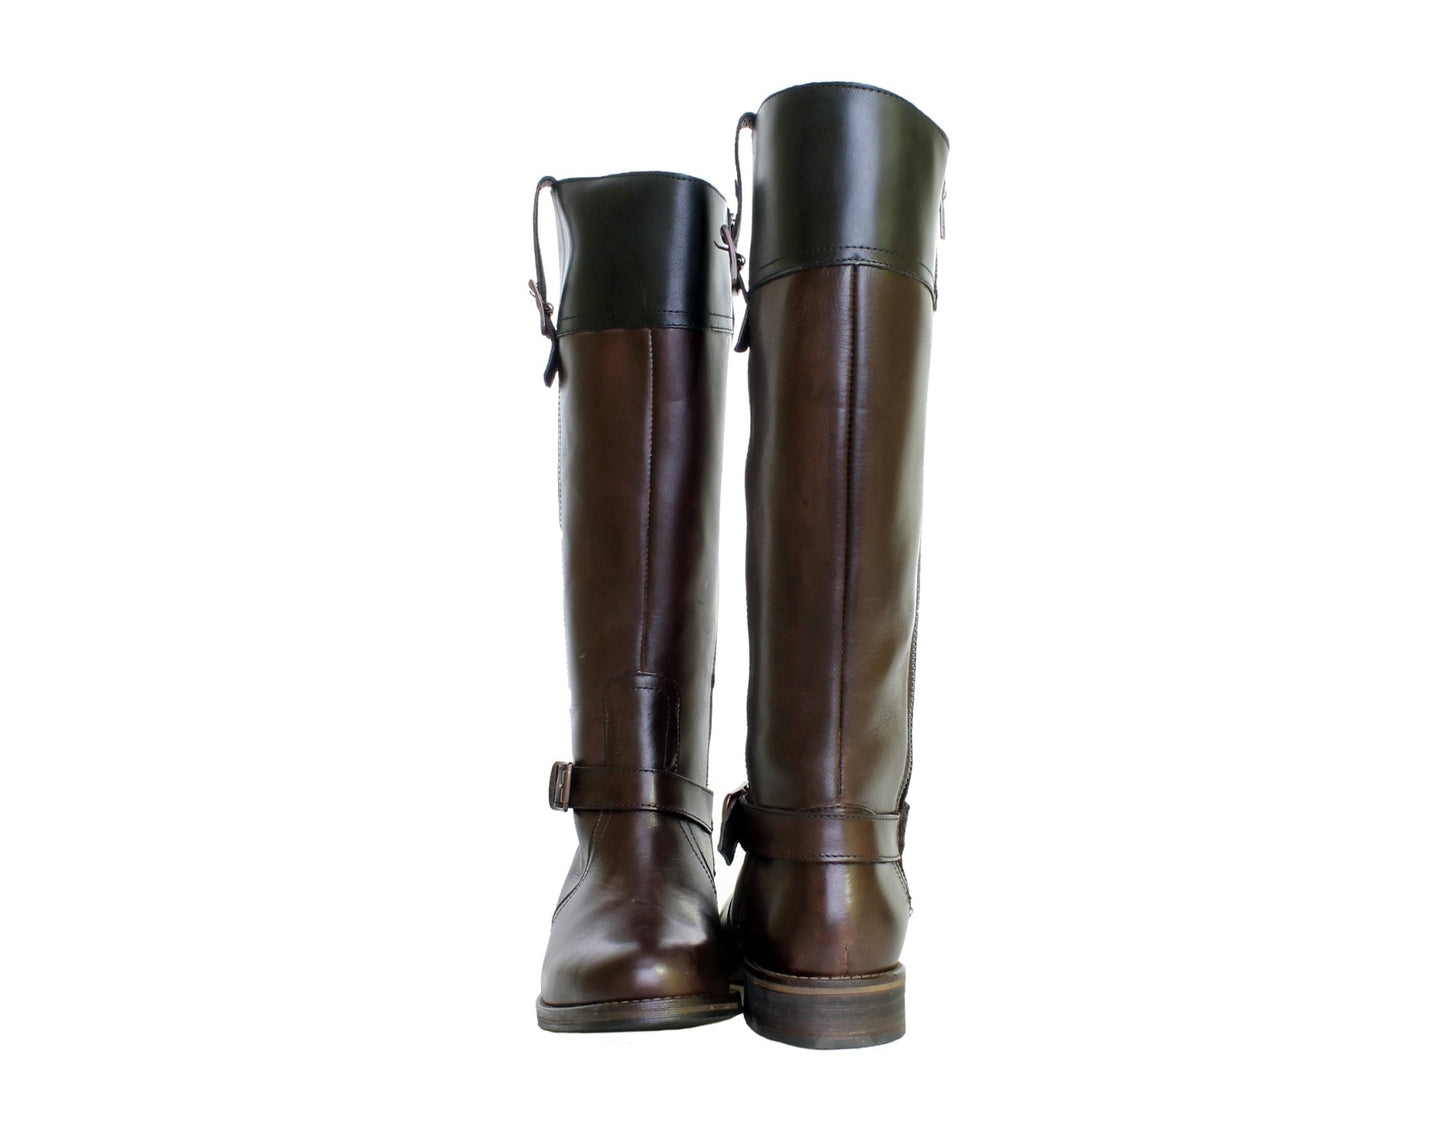 1883 by Wolverine Shannon Dark Brown Women's Riding Boots W40090 - Becauze